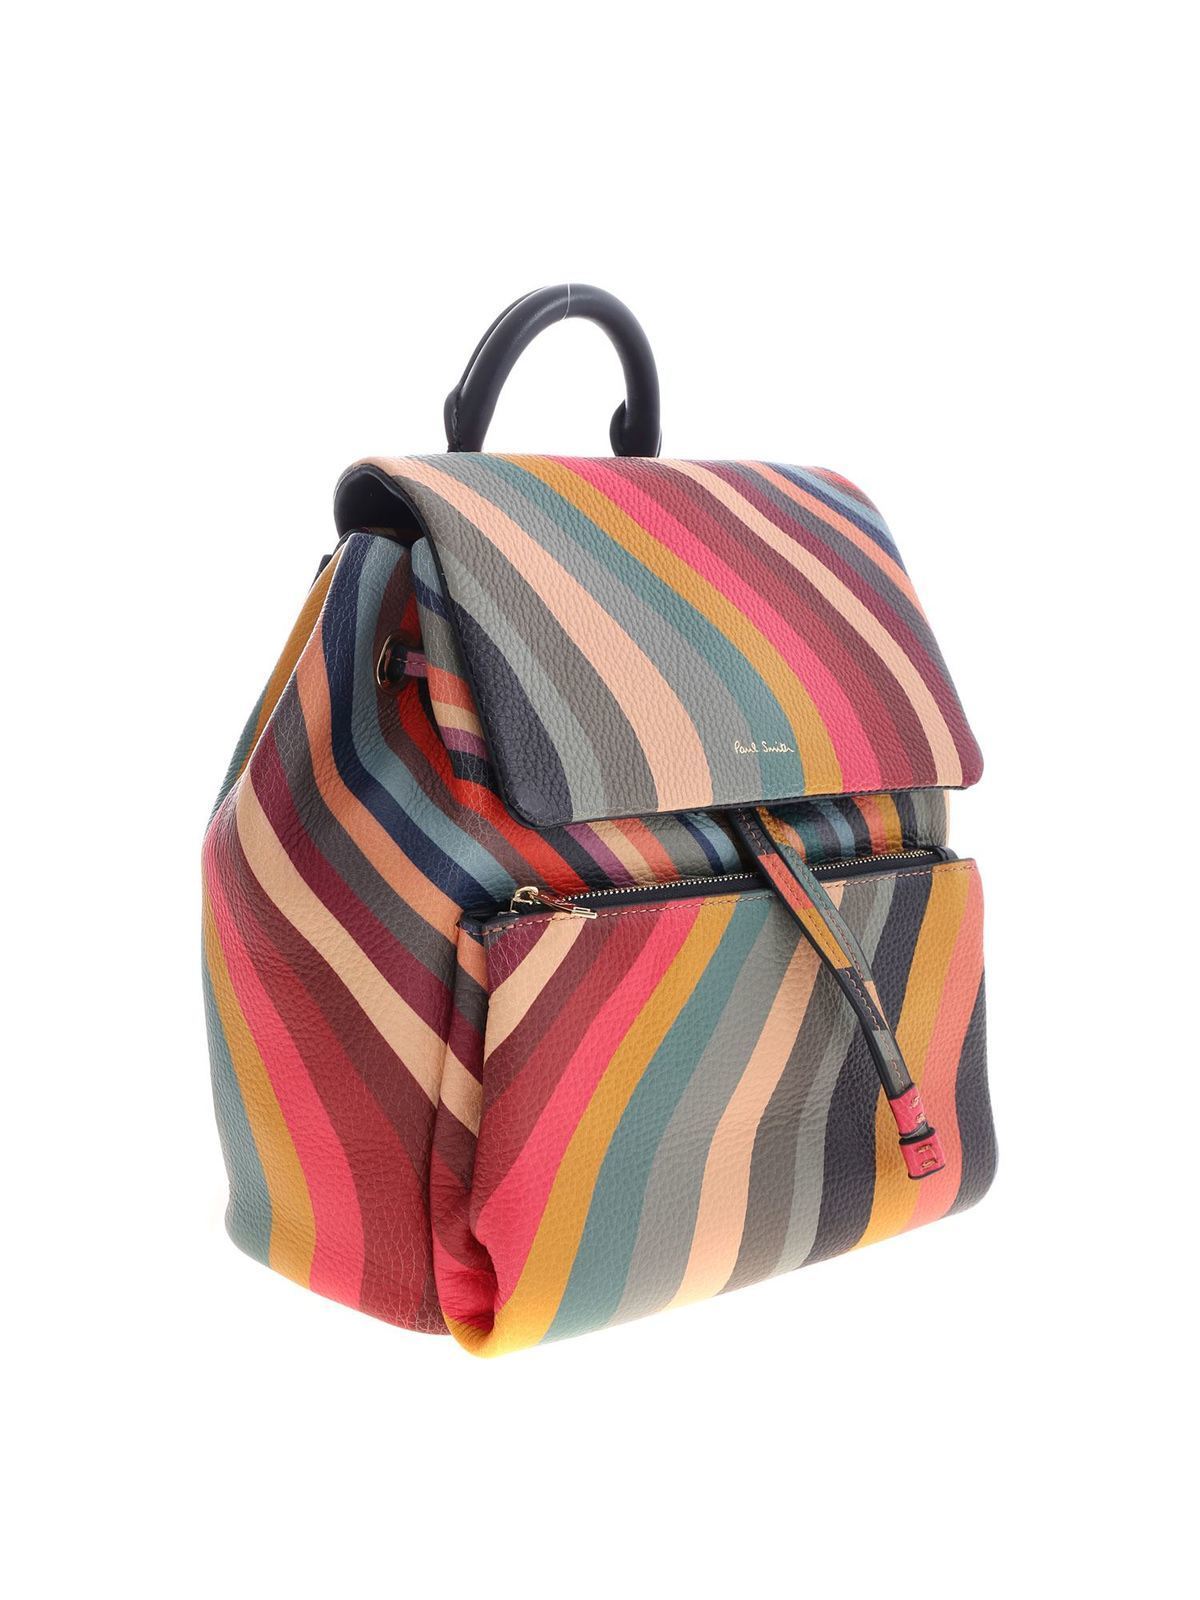 Paul Smith Swirl Striped Leather Backpack for Women